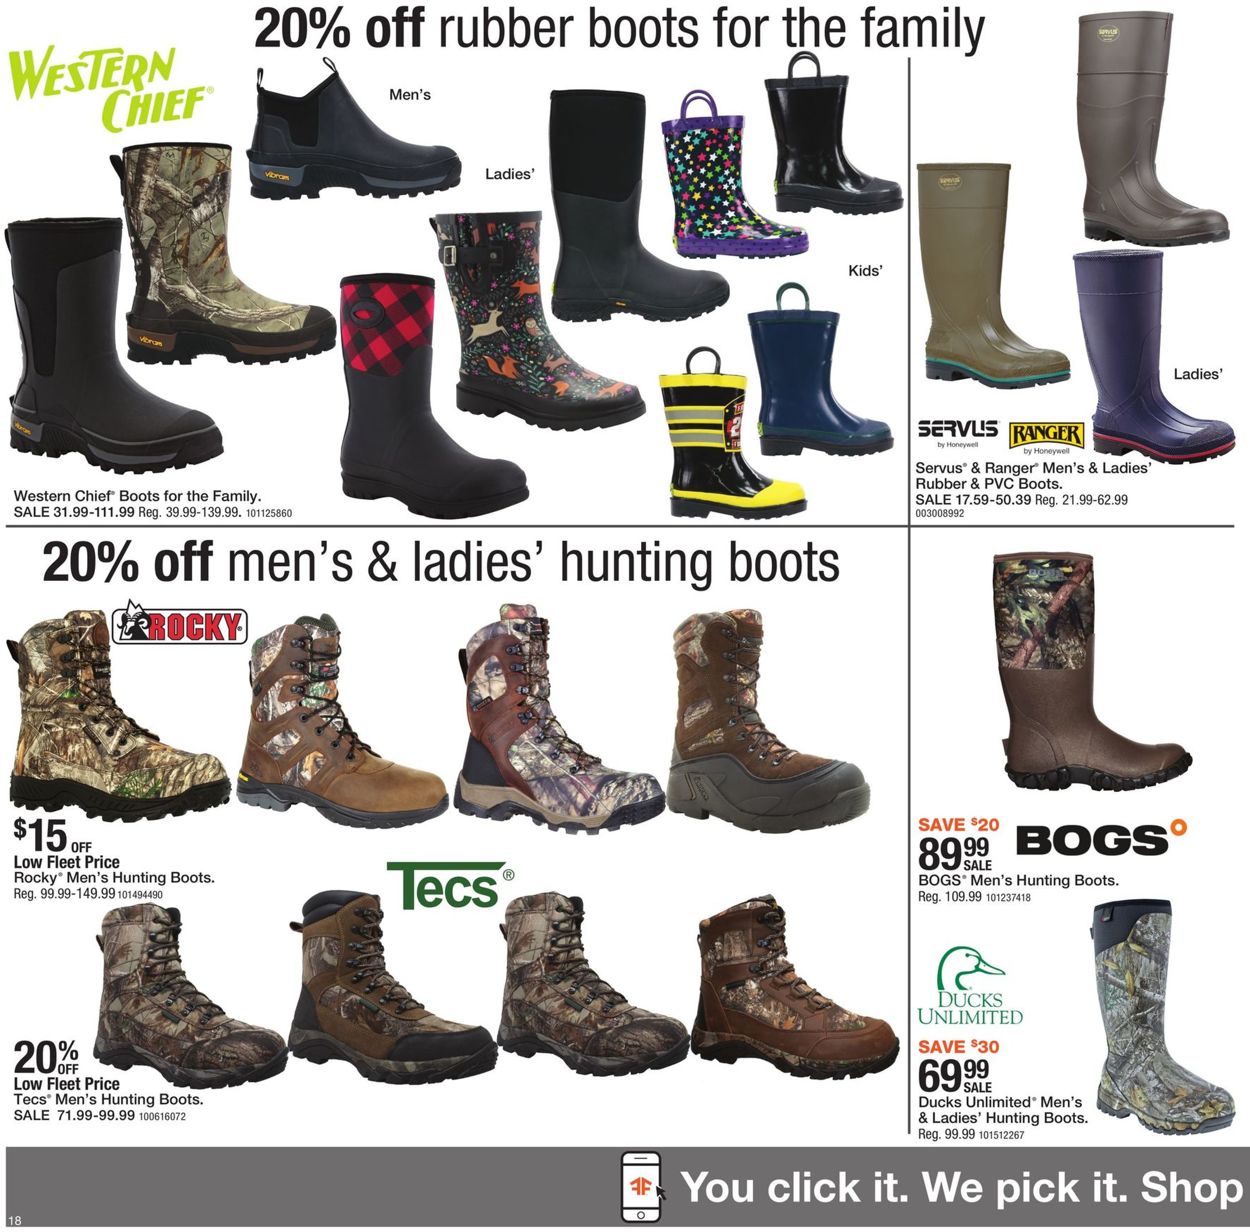 Mills Fleet Farm Current weekly ad 09/25 - 10/03/2020 [18] - frequent ...